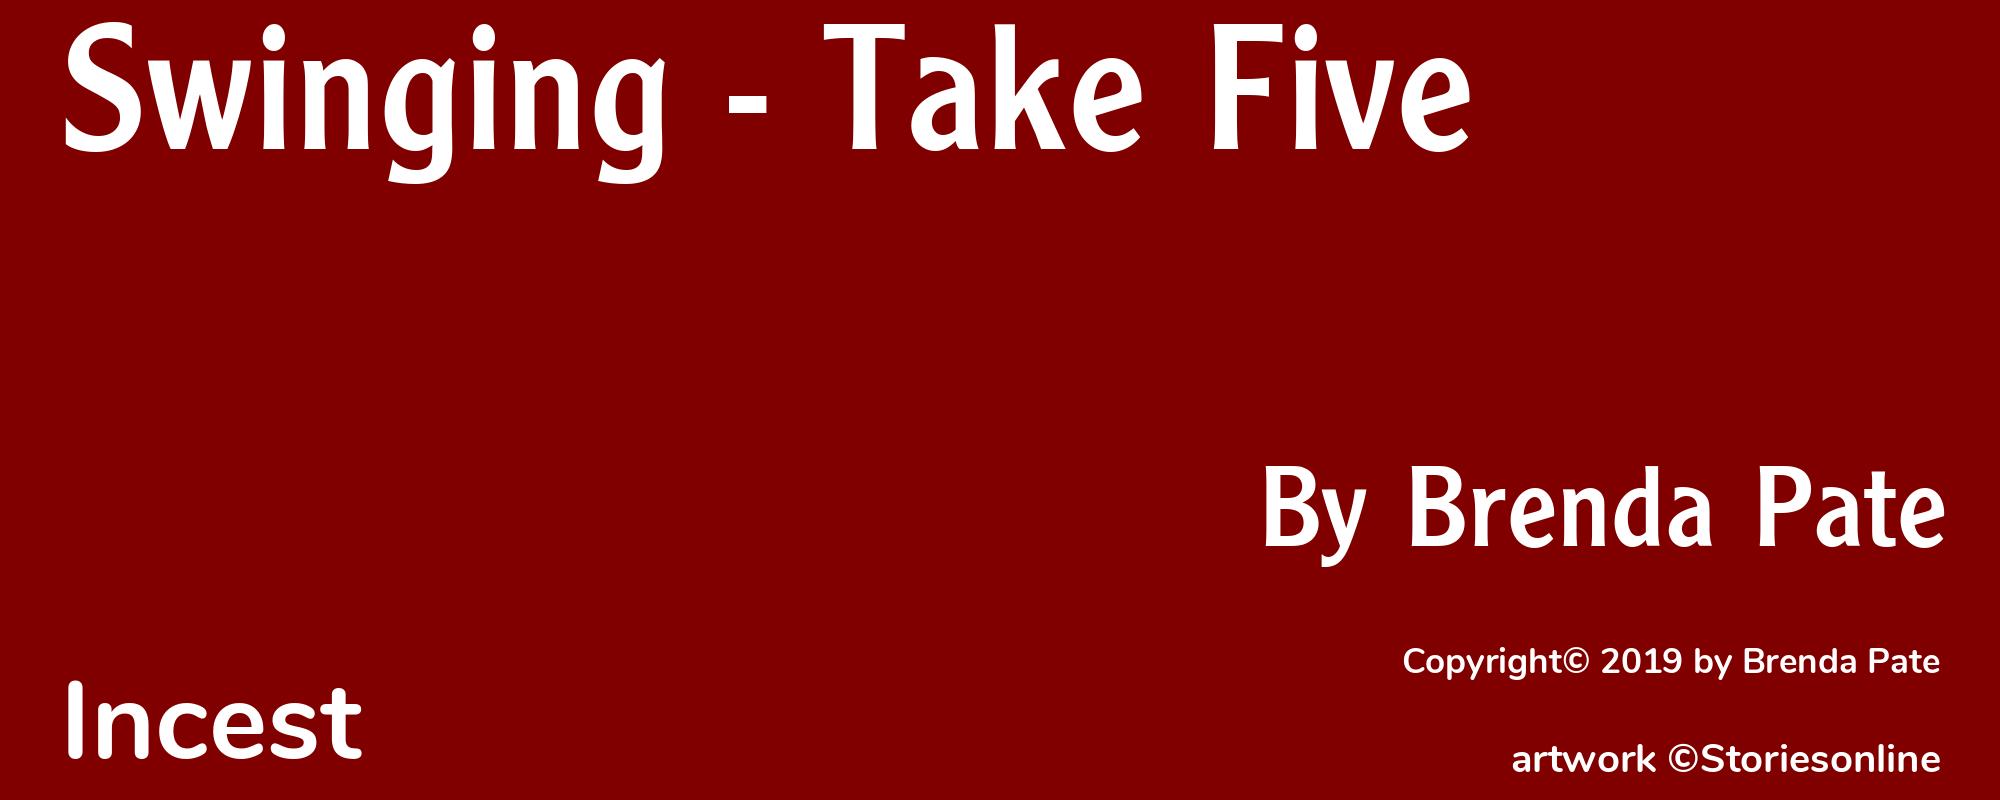 Swinging - Take Five - Cover